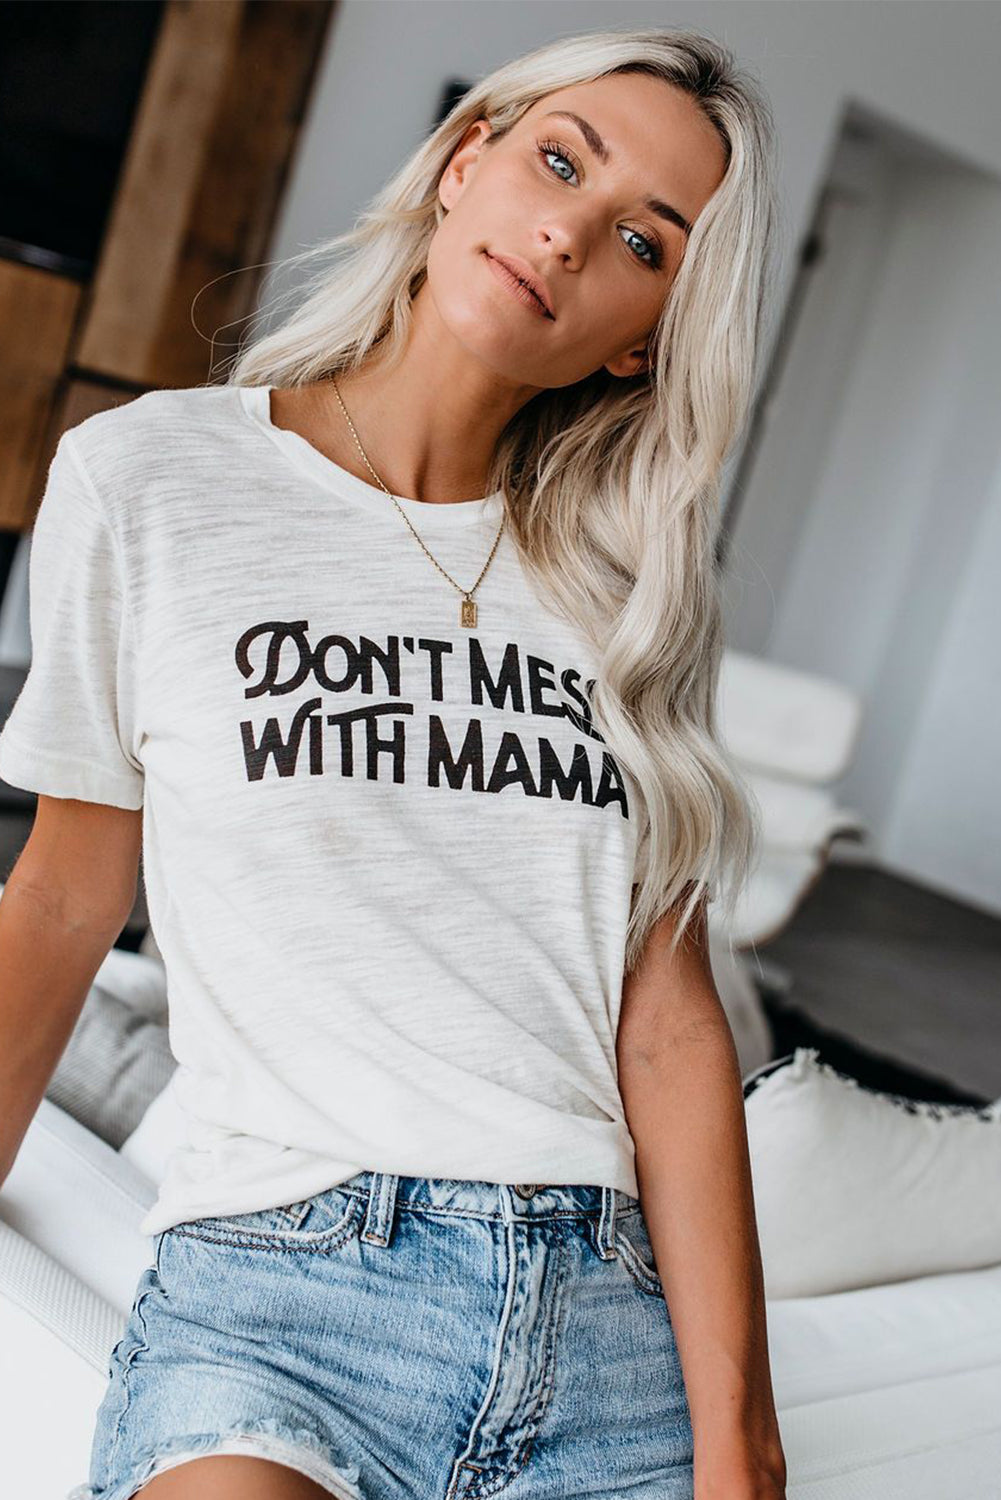 DON'T MESS WITH MAMA White Tee